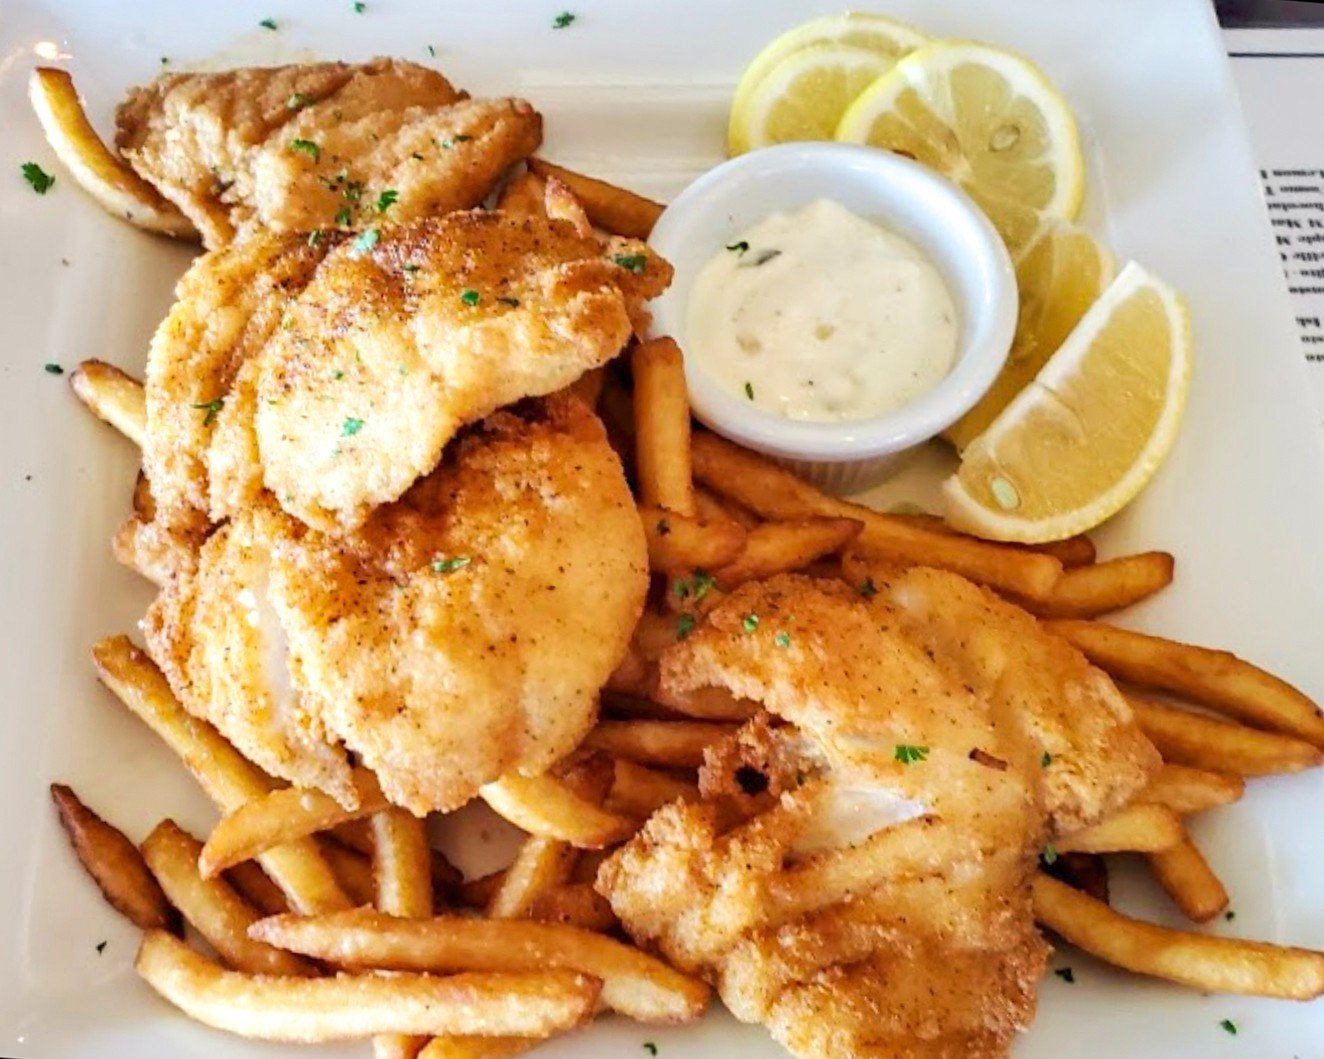 Our Fish and Chips dish is ready for its close-up 📸 😋

Bite into best catch white fish lightly breaded and served with lemon, tartar sauce, and shoestring french fries 😋